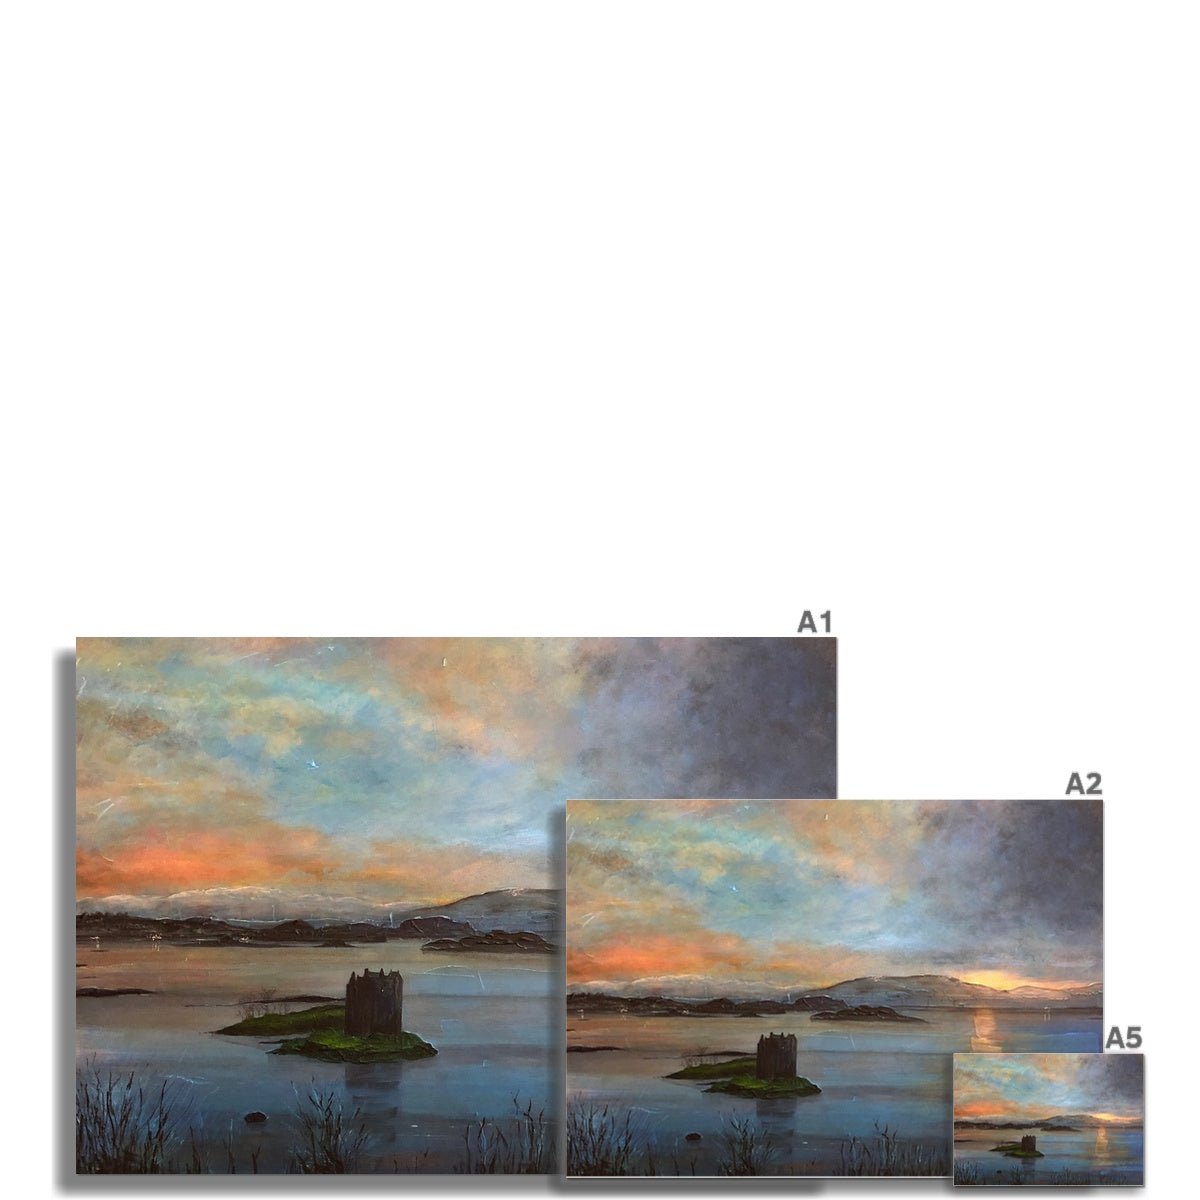 Castle Stalker Twilight Painting | Fine Art Prints From Scotland-Unframed Prints-Historic & Iconic Scotland Art Gallery-Paintings, Prints, Homeware, Art Gifts From Scotland By Scottish Artist Kevin Hunter